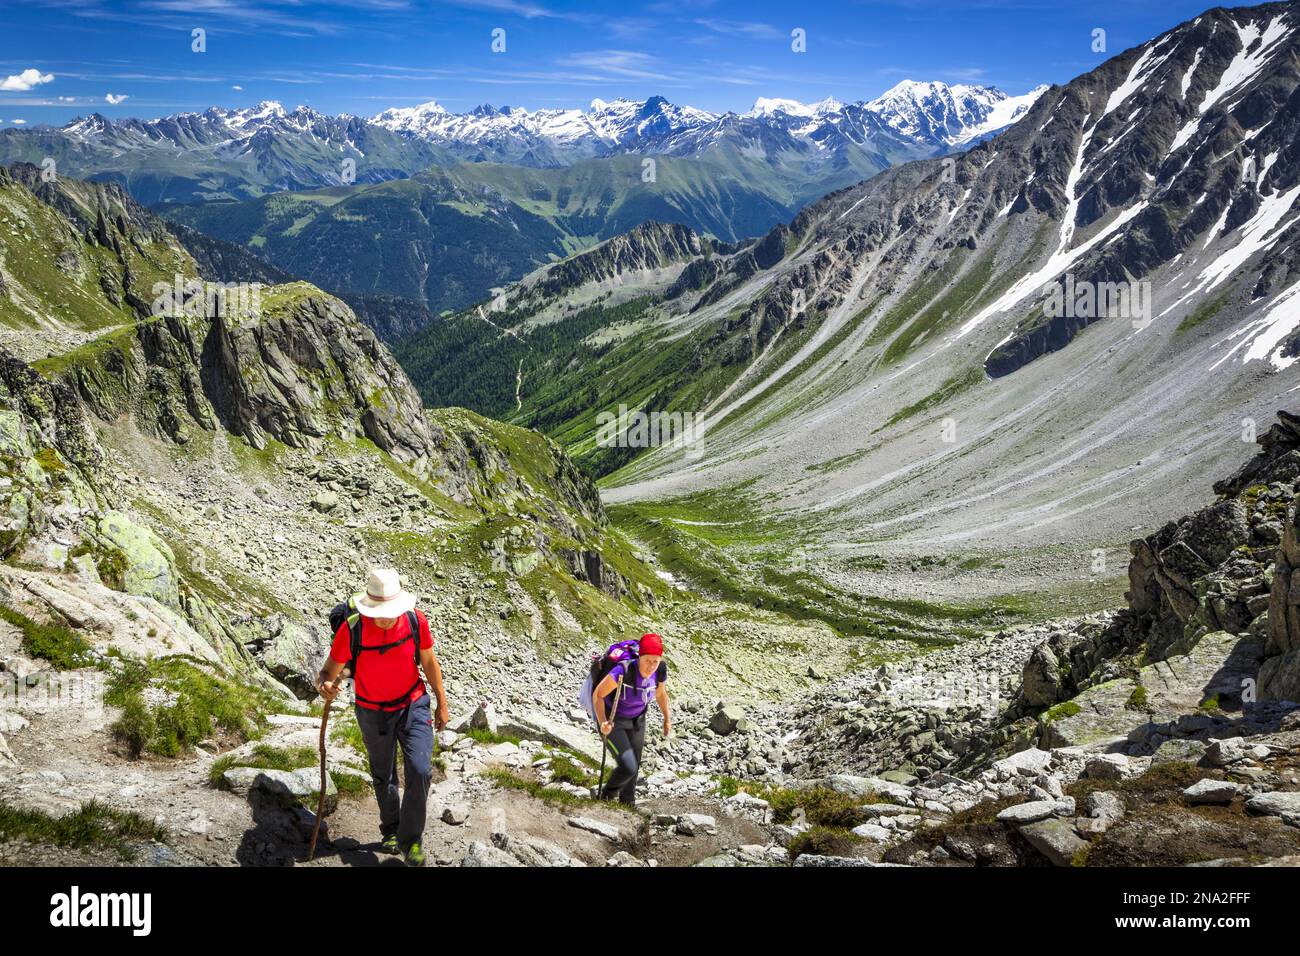 Hikers climbing up  the 'Fenetre d'Arpette' mountain pass, Swiss Alps mountains in the background; Trient, Martigny, Switzerland Stock Photo